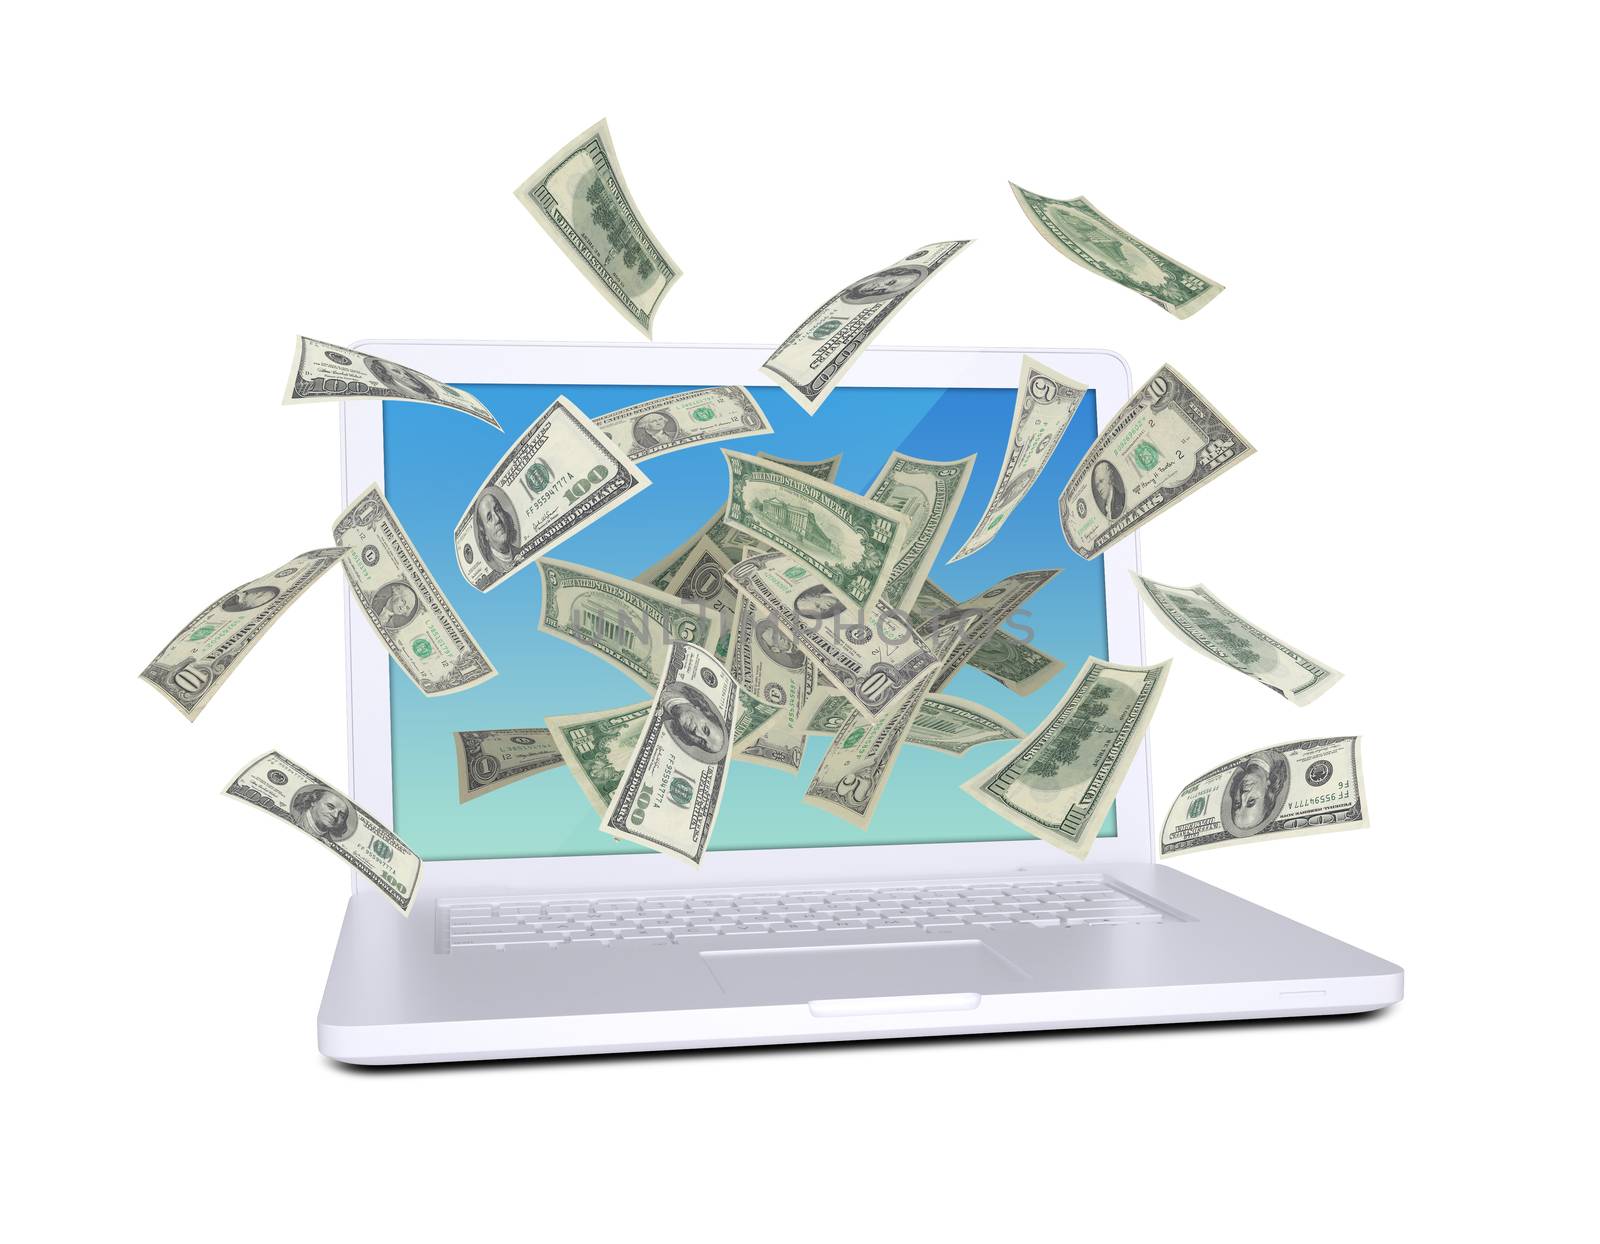 Dollar notes flying around the laptop by cherezoff